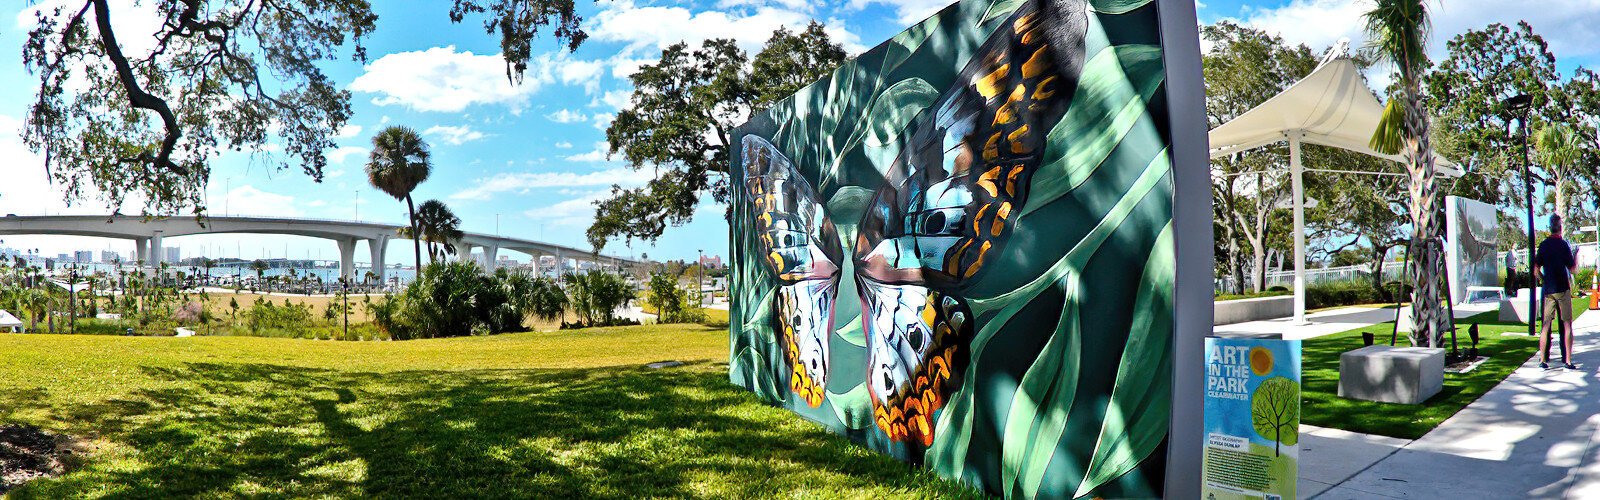 Celebrating Art in the Park, the finished butterfly mural of artist Alyssa Dunlap is a distinctive addition to Coachman Park’s natural environment.